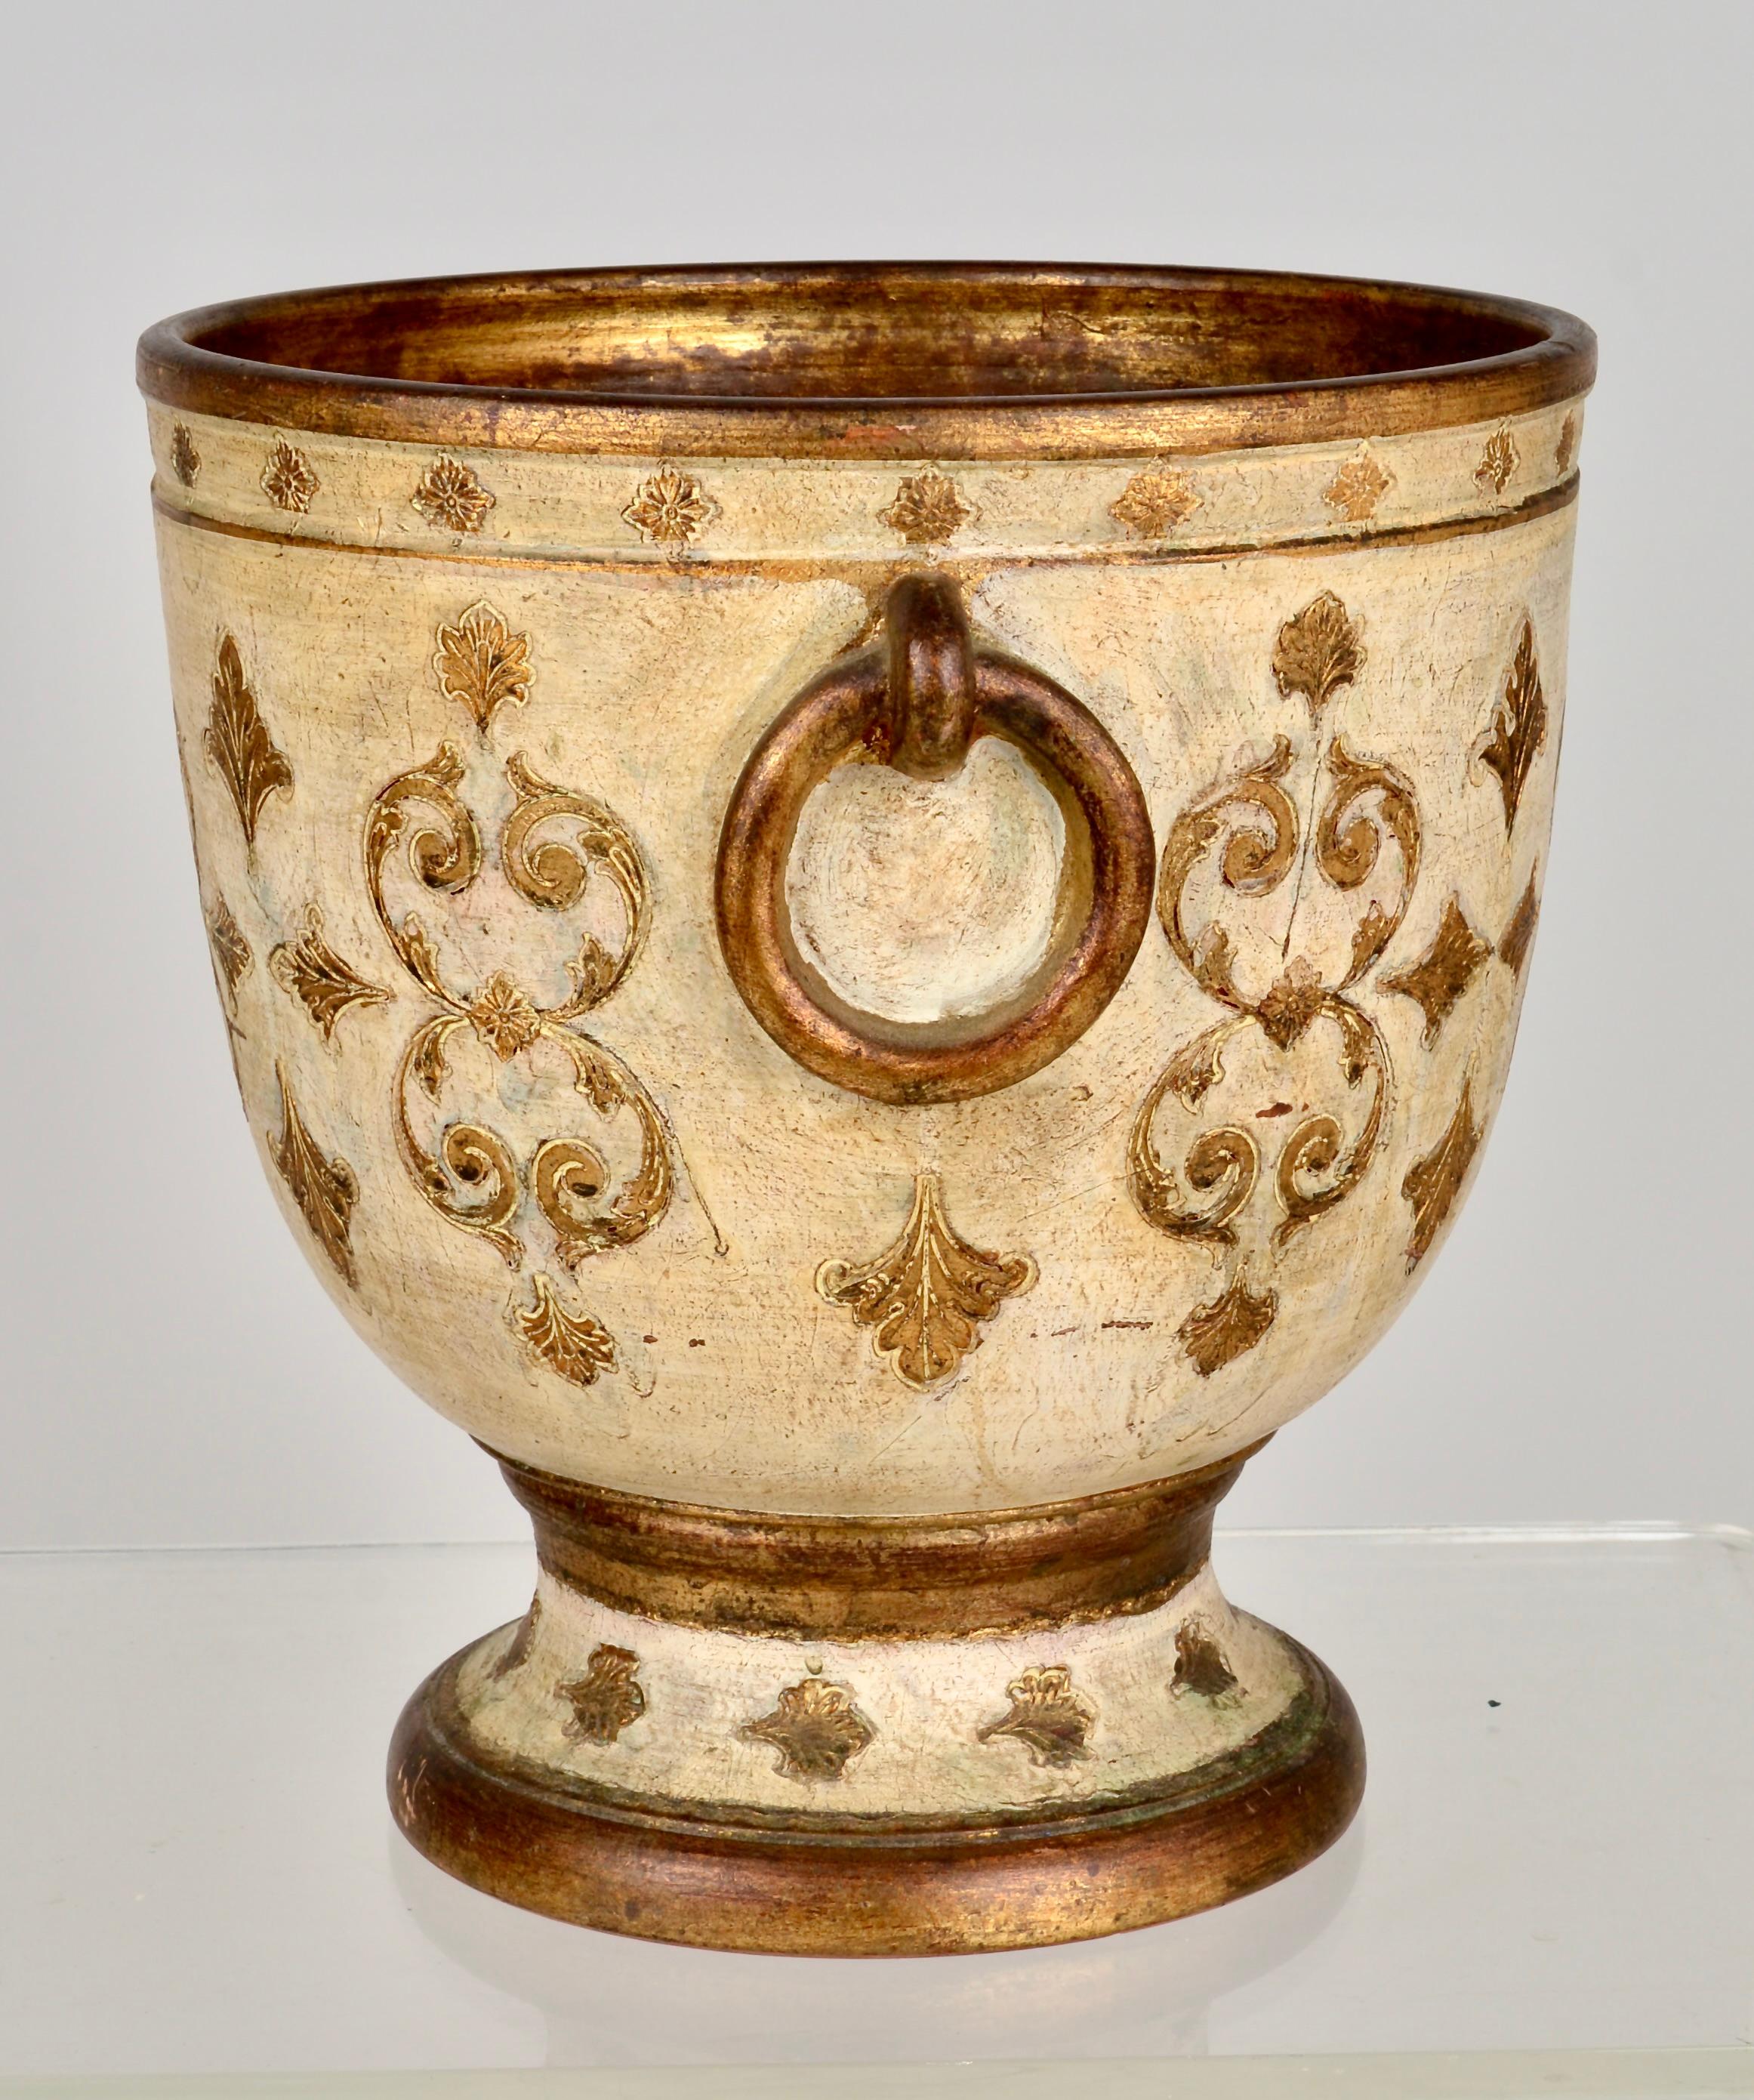 An unusual Italian jardiniere featuring Florentine style incised decorations in gilt and cream. Great size at 15.5